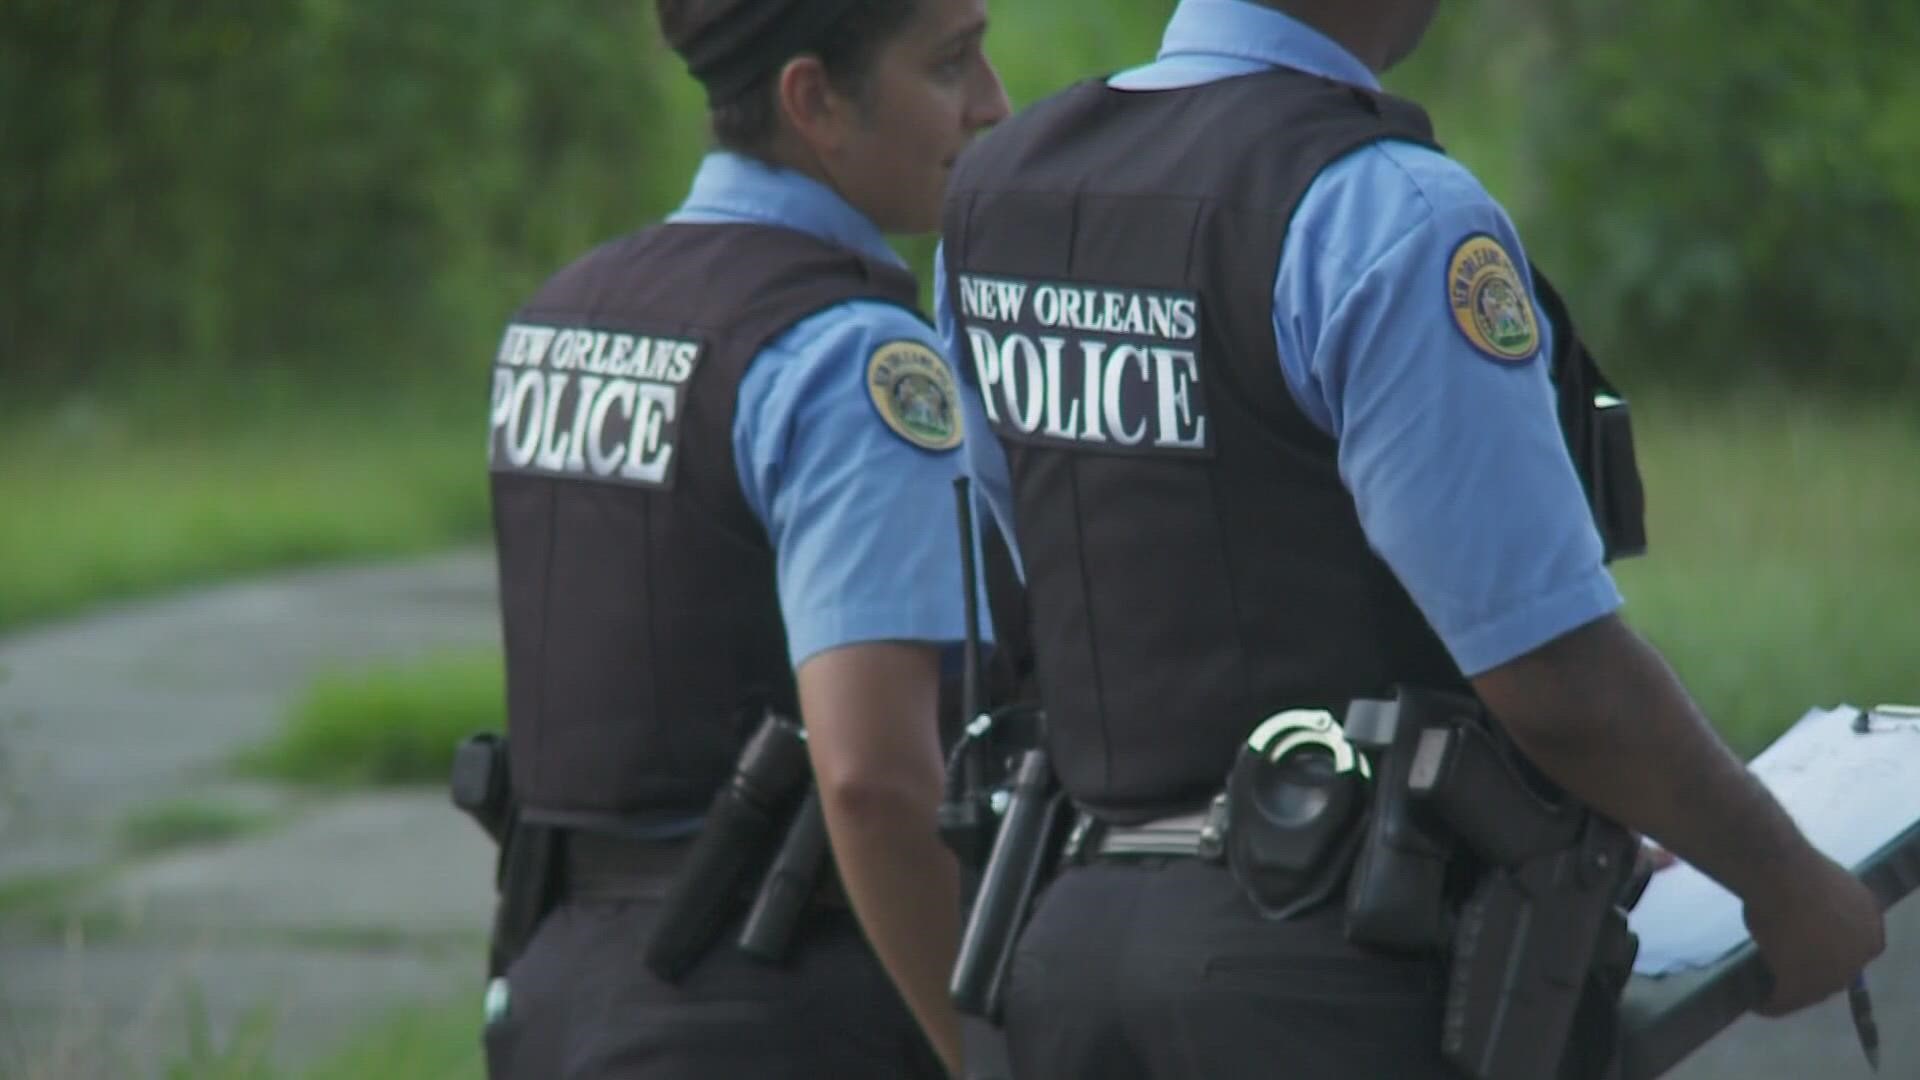 There have been more than 140 murders reported in New Orleans in 2022. An unofficial tally showed 31 killings in June - the most in a single month since July 2004.